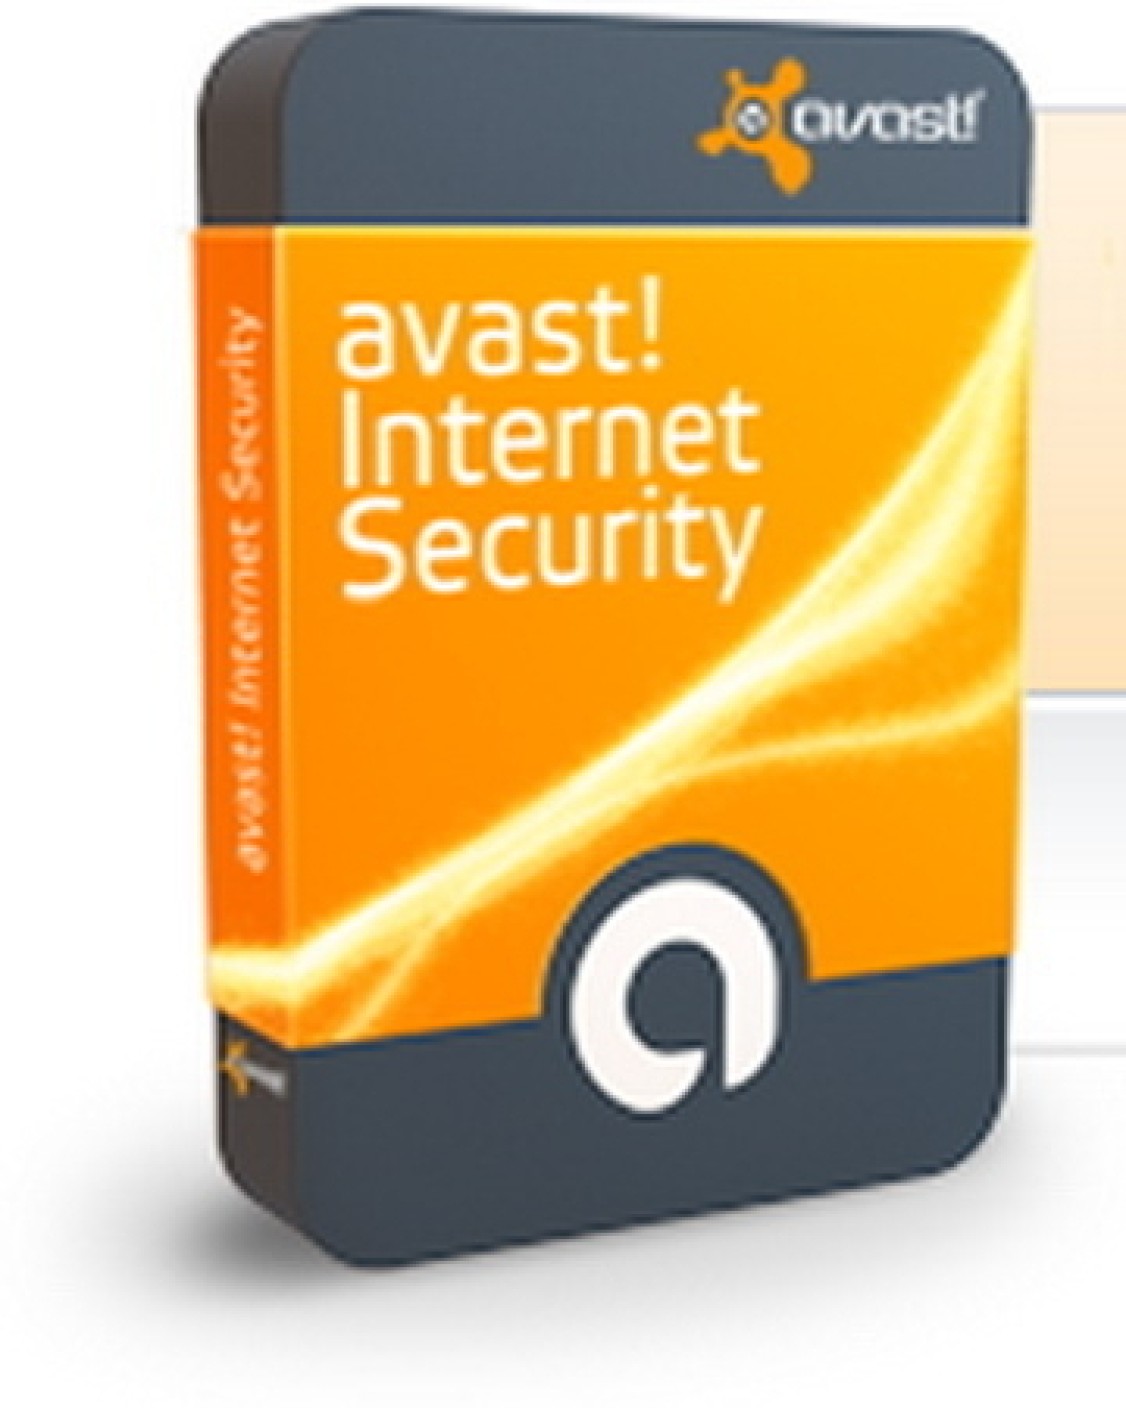 avast one service disabled